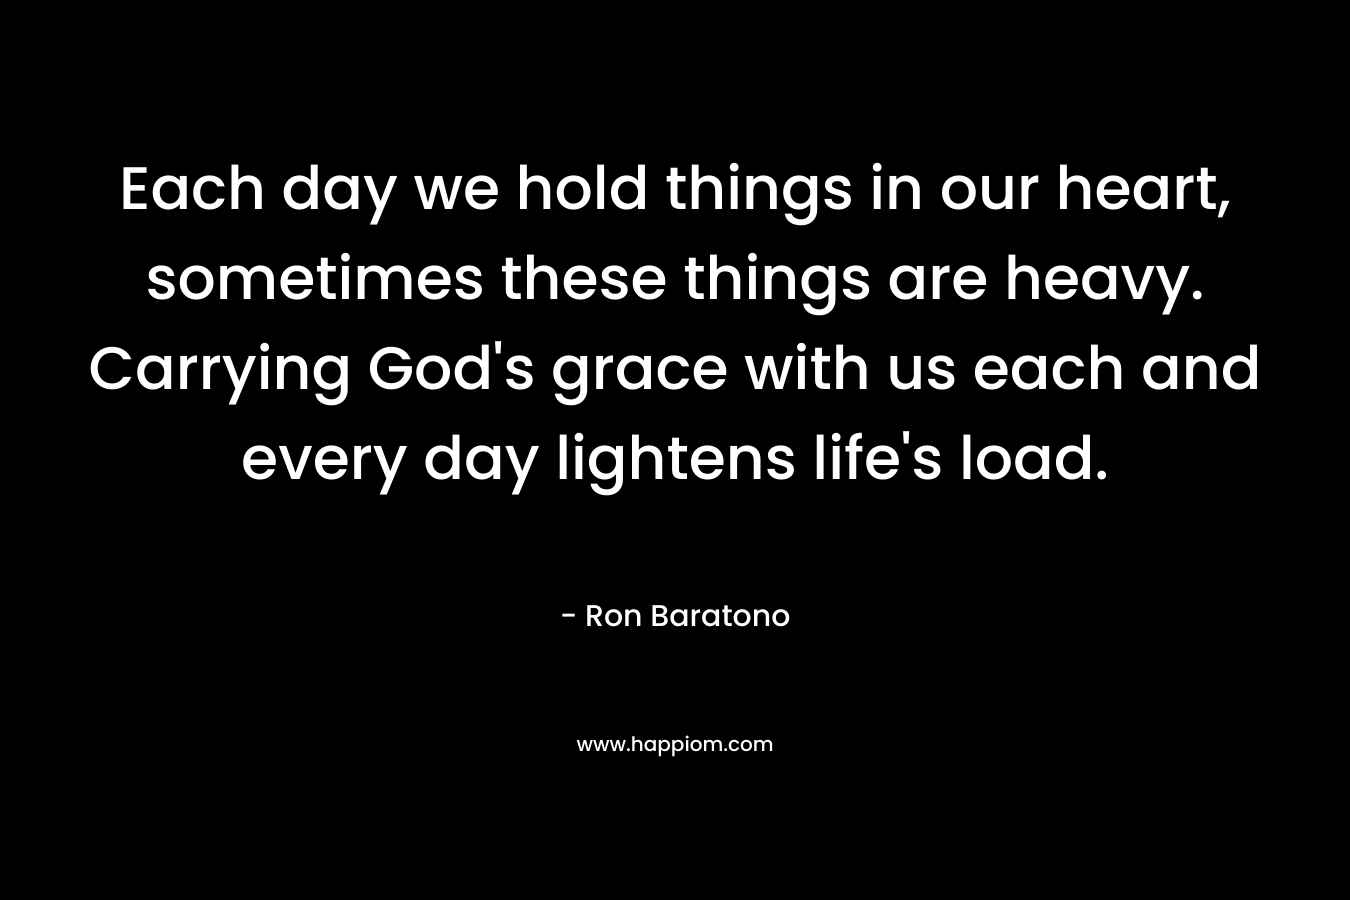 Each day we hold things in our heart, sometimes these things are heavy. Carrying God’s grace with us each and every day lightens life’s load. – Ron Baratono